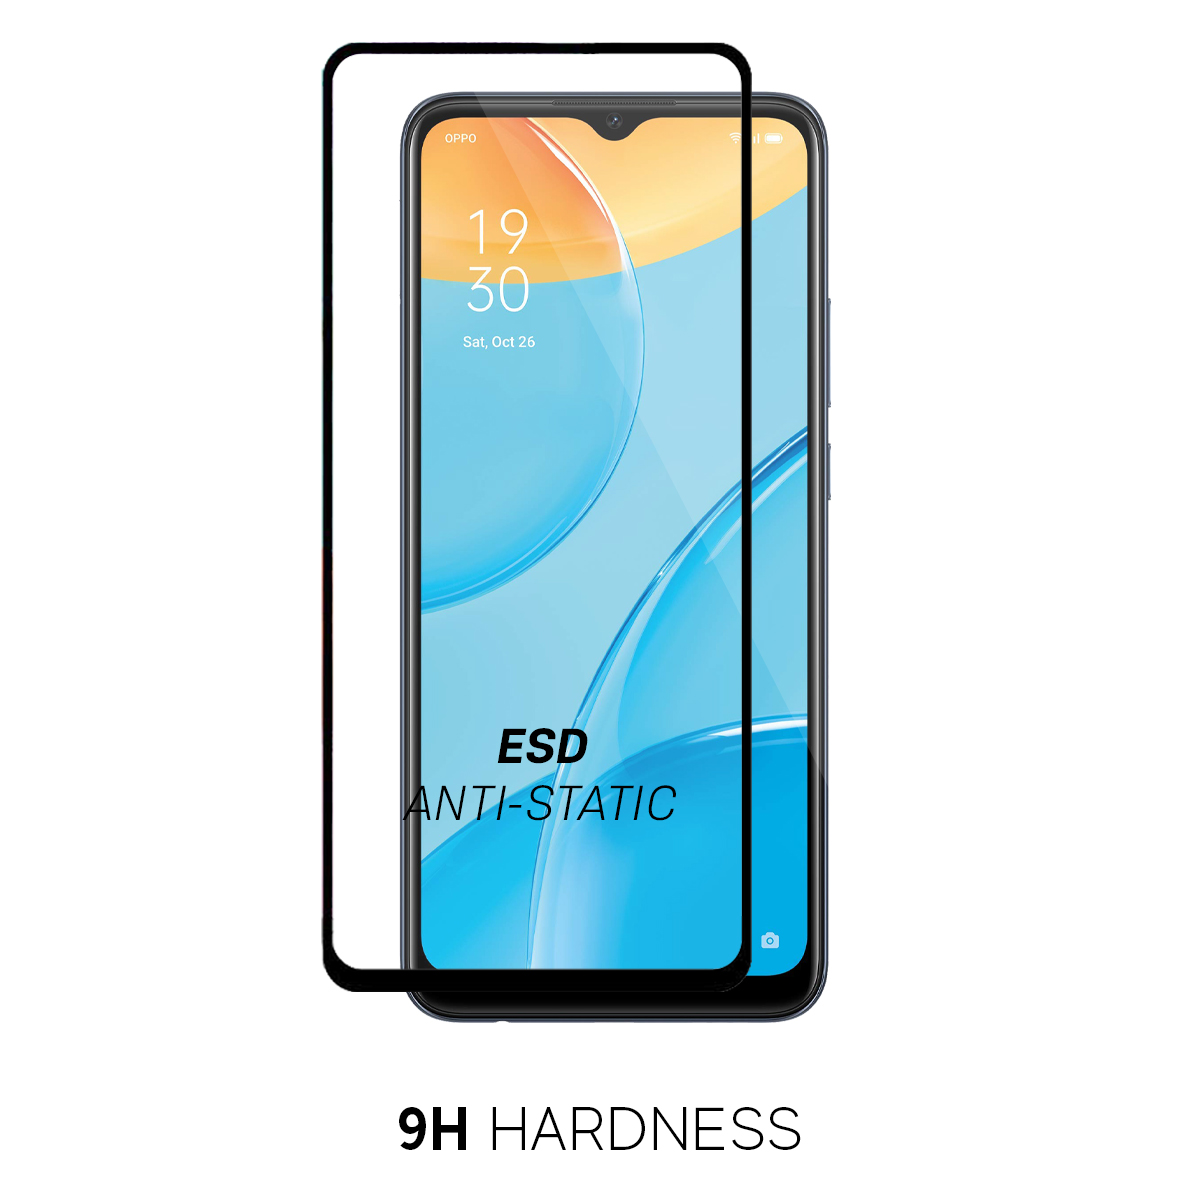 Beyox ESD Anti Static 5D Glass for Oppo A9